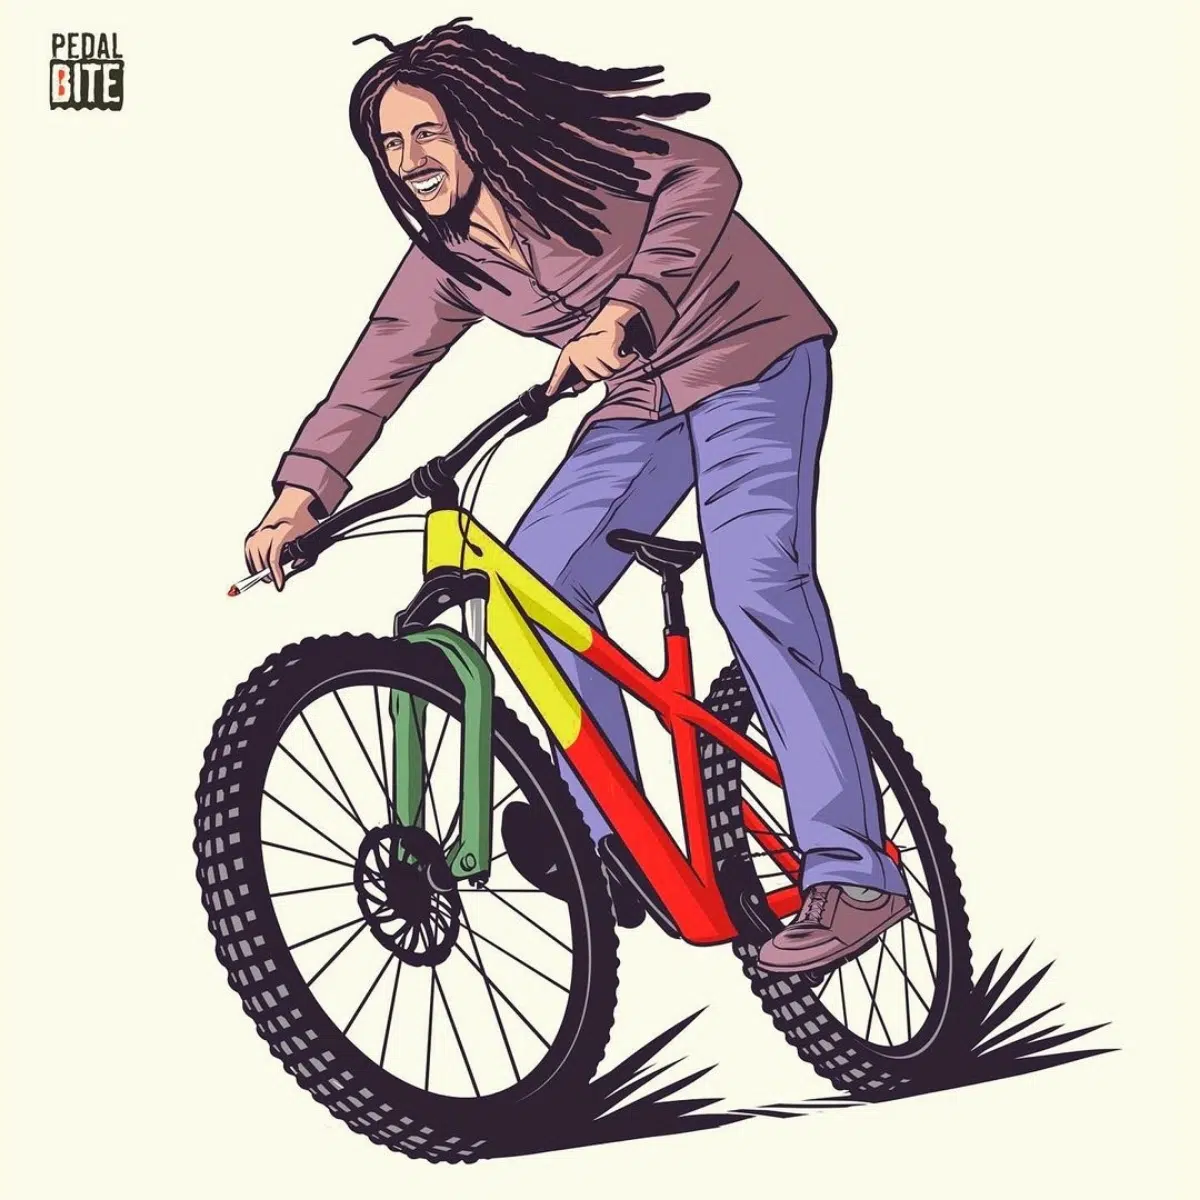 DOWNLOAD: Bob Marley – “Could You Be Loved” Mp3